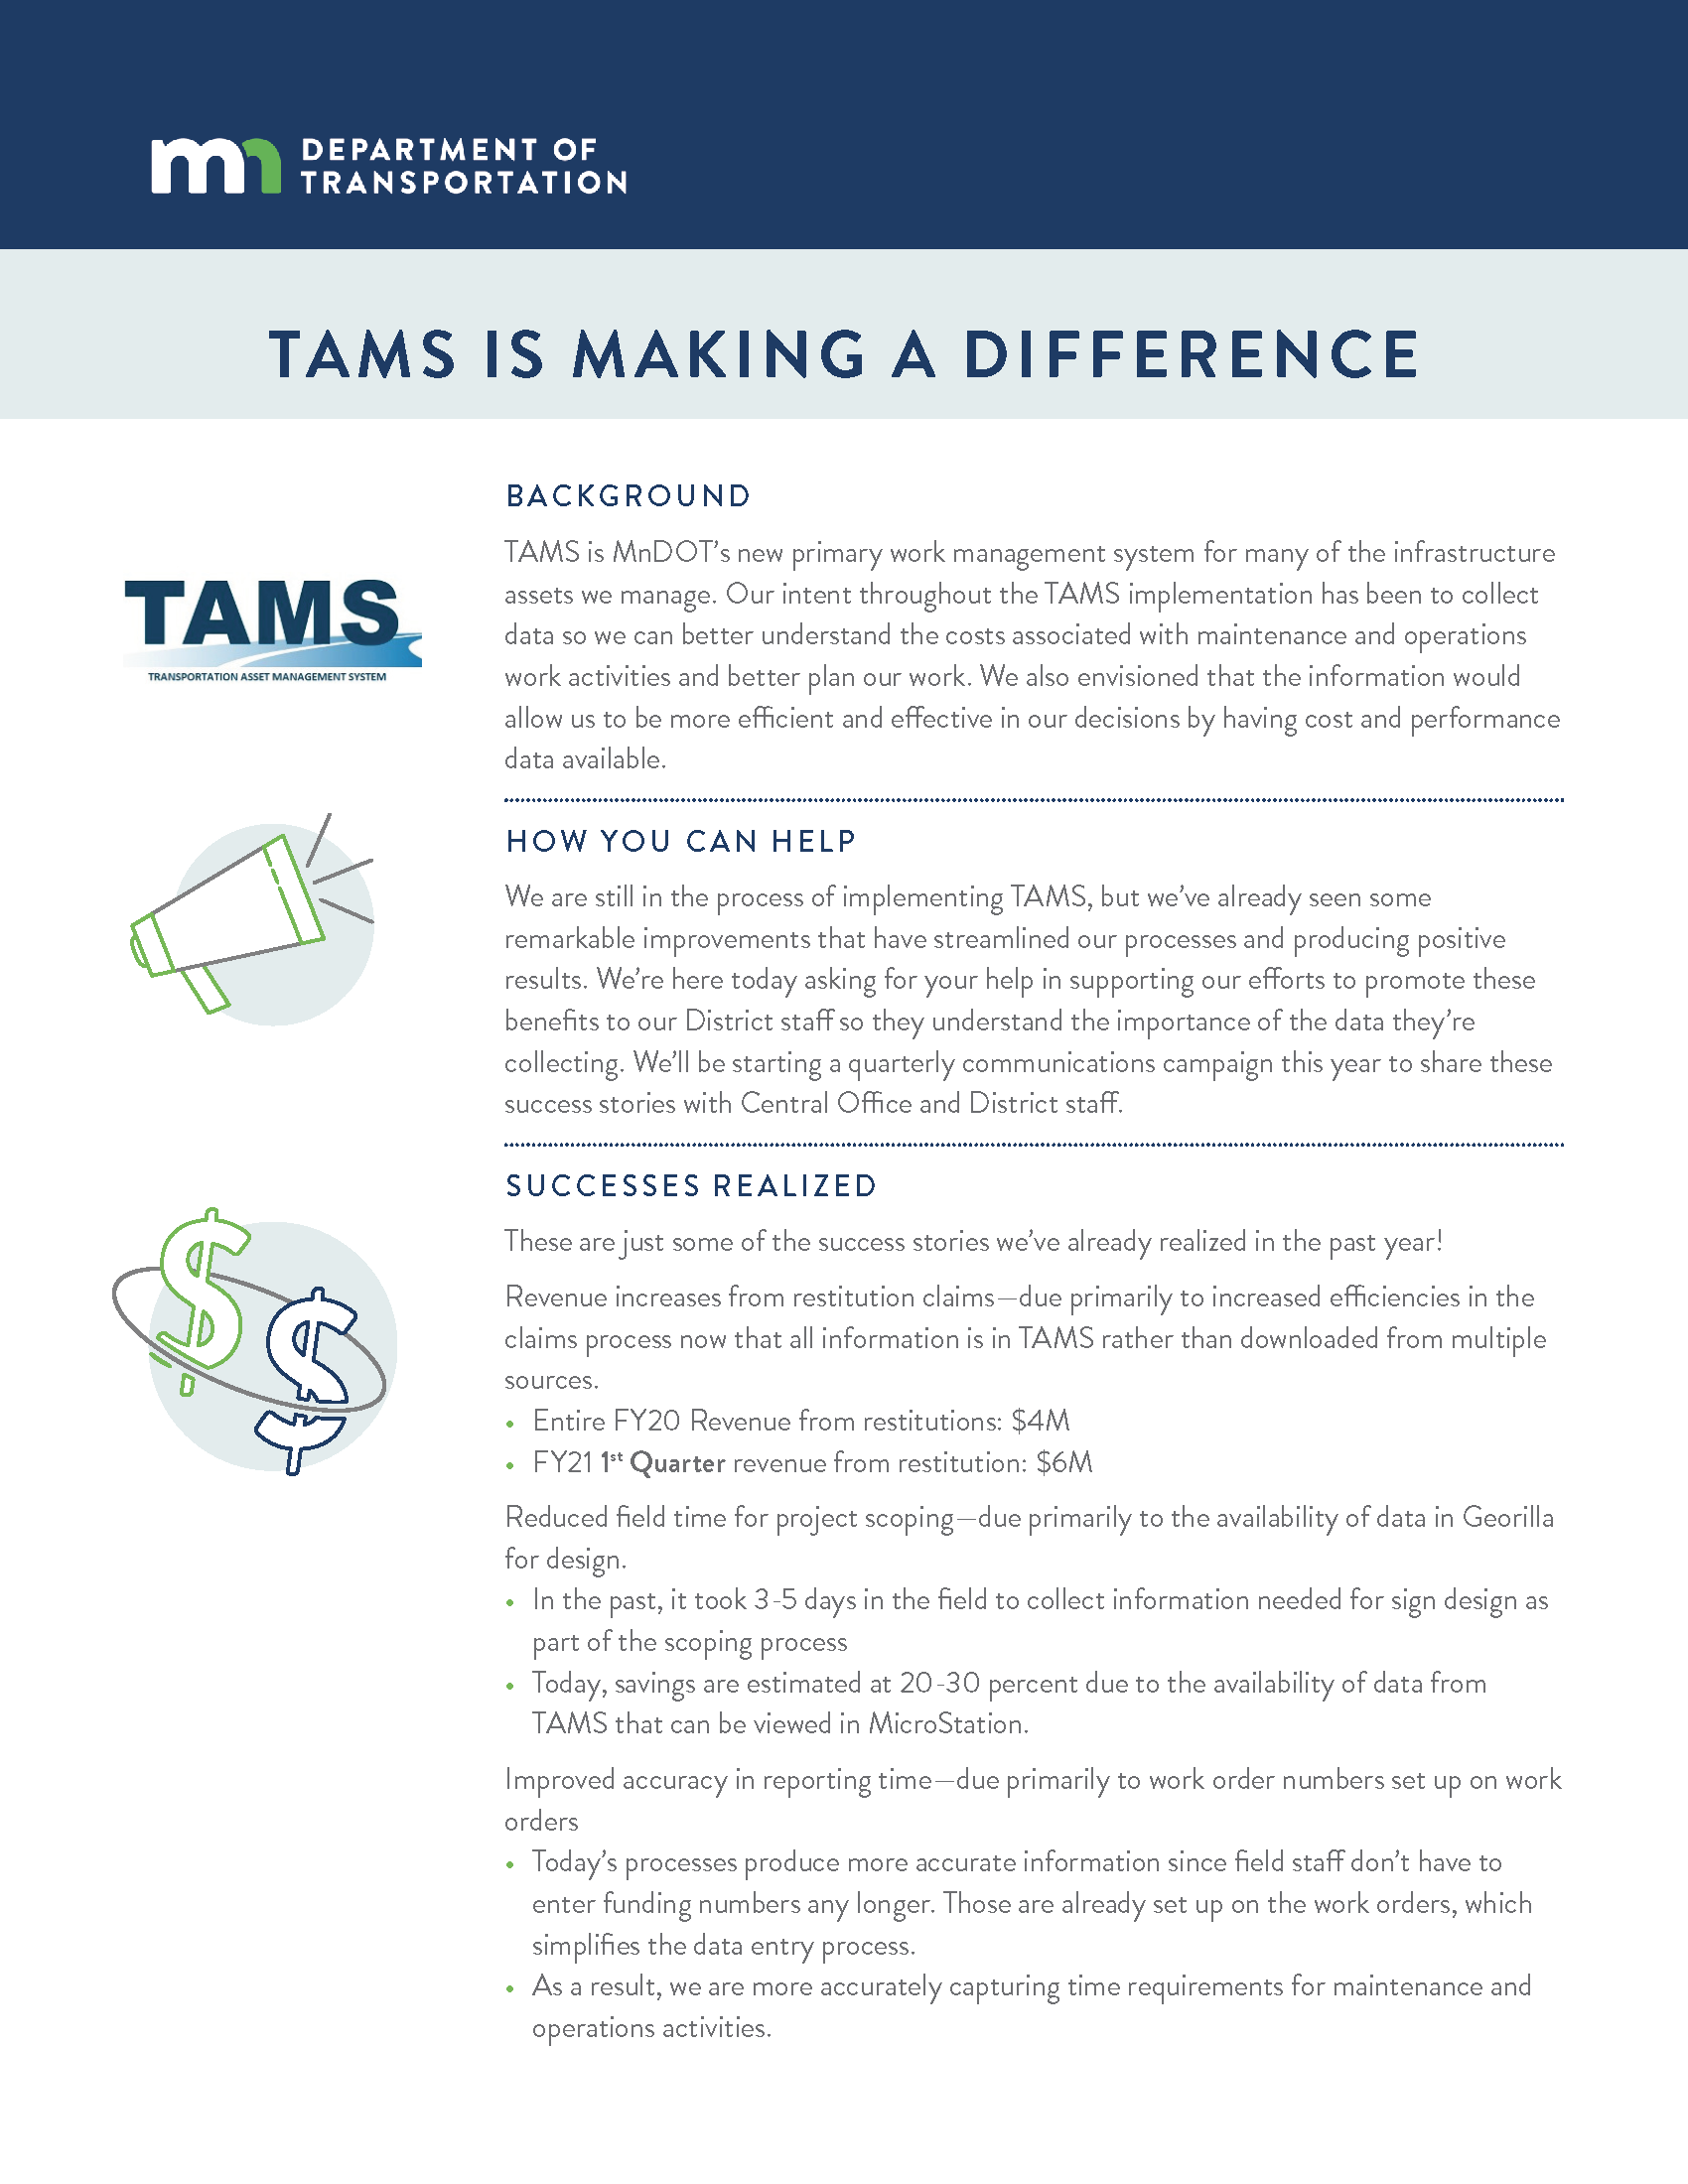 TAMS is Making a Difference (flyer)